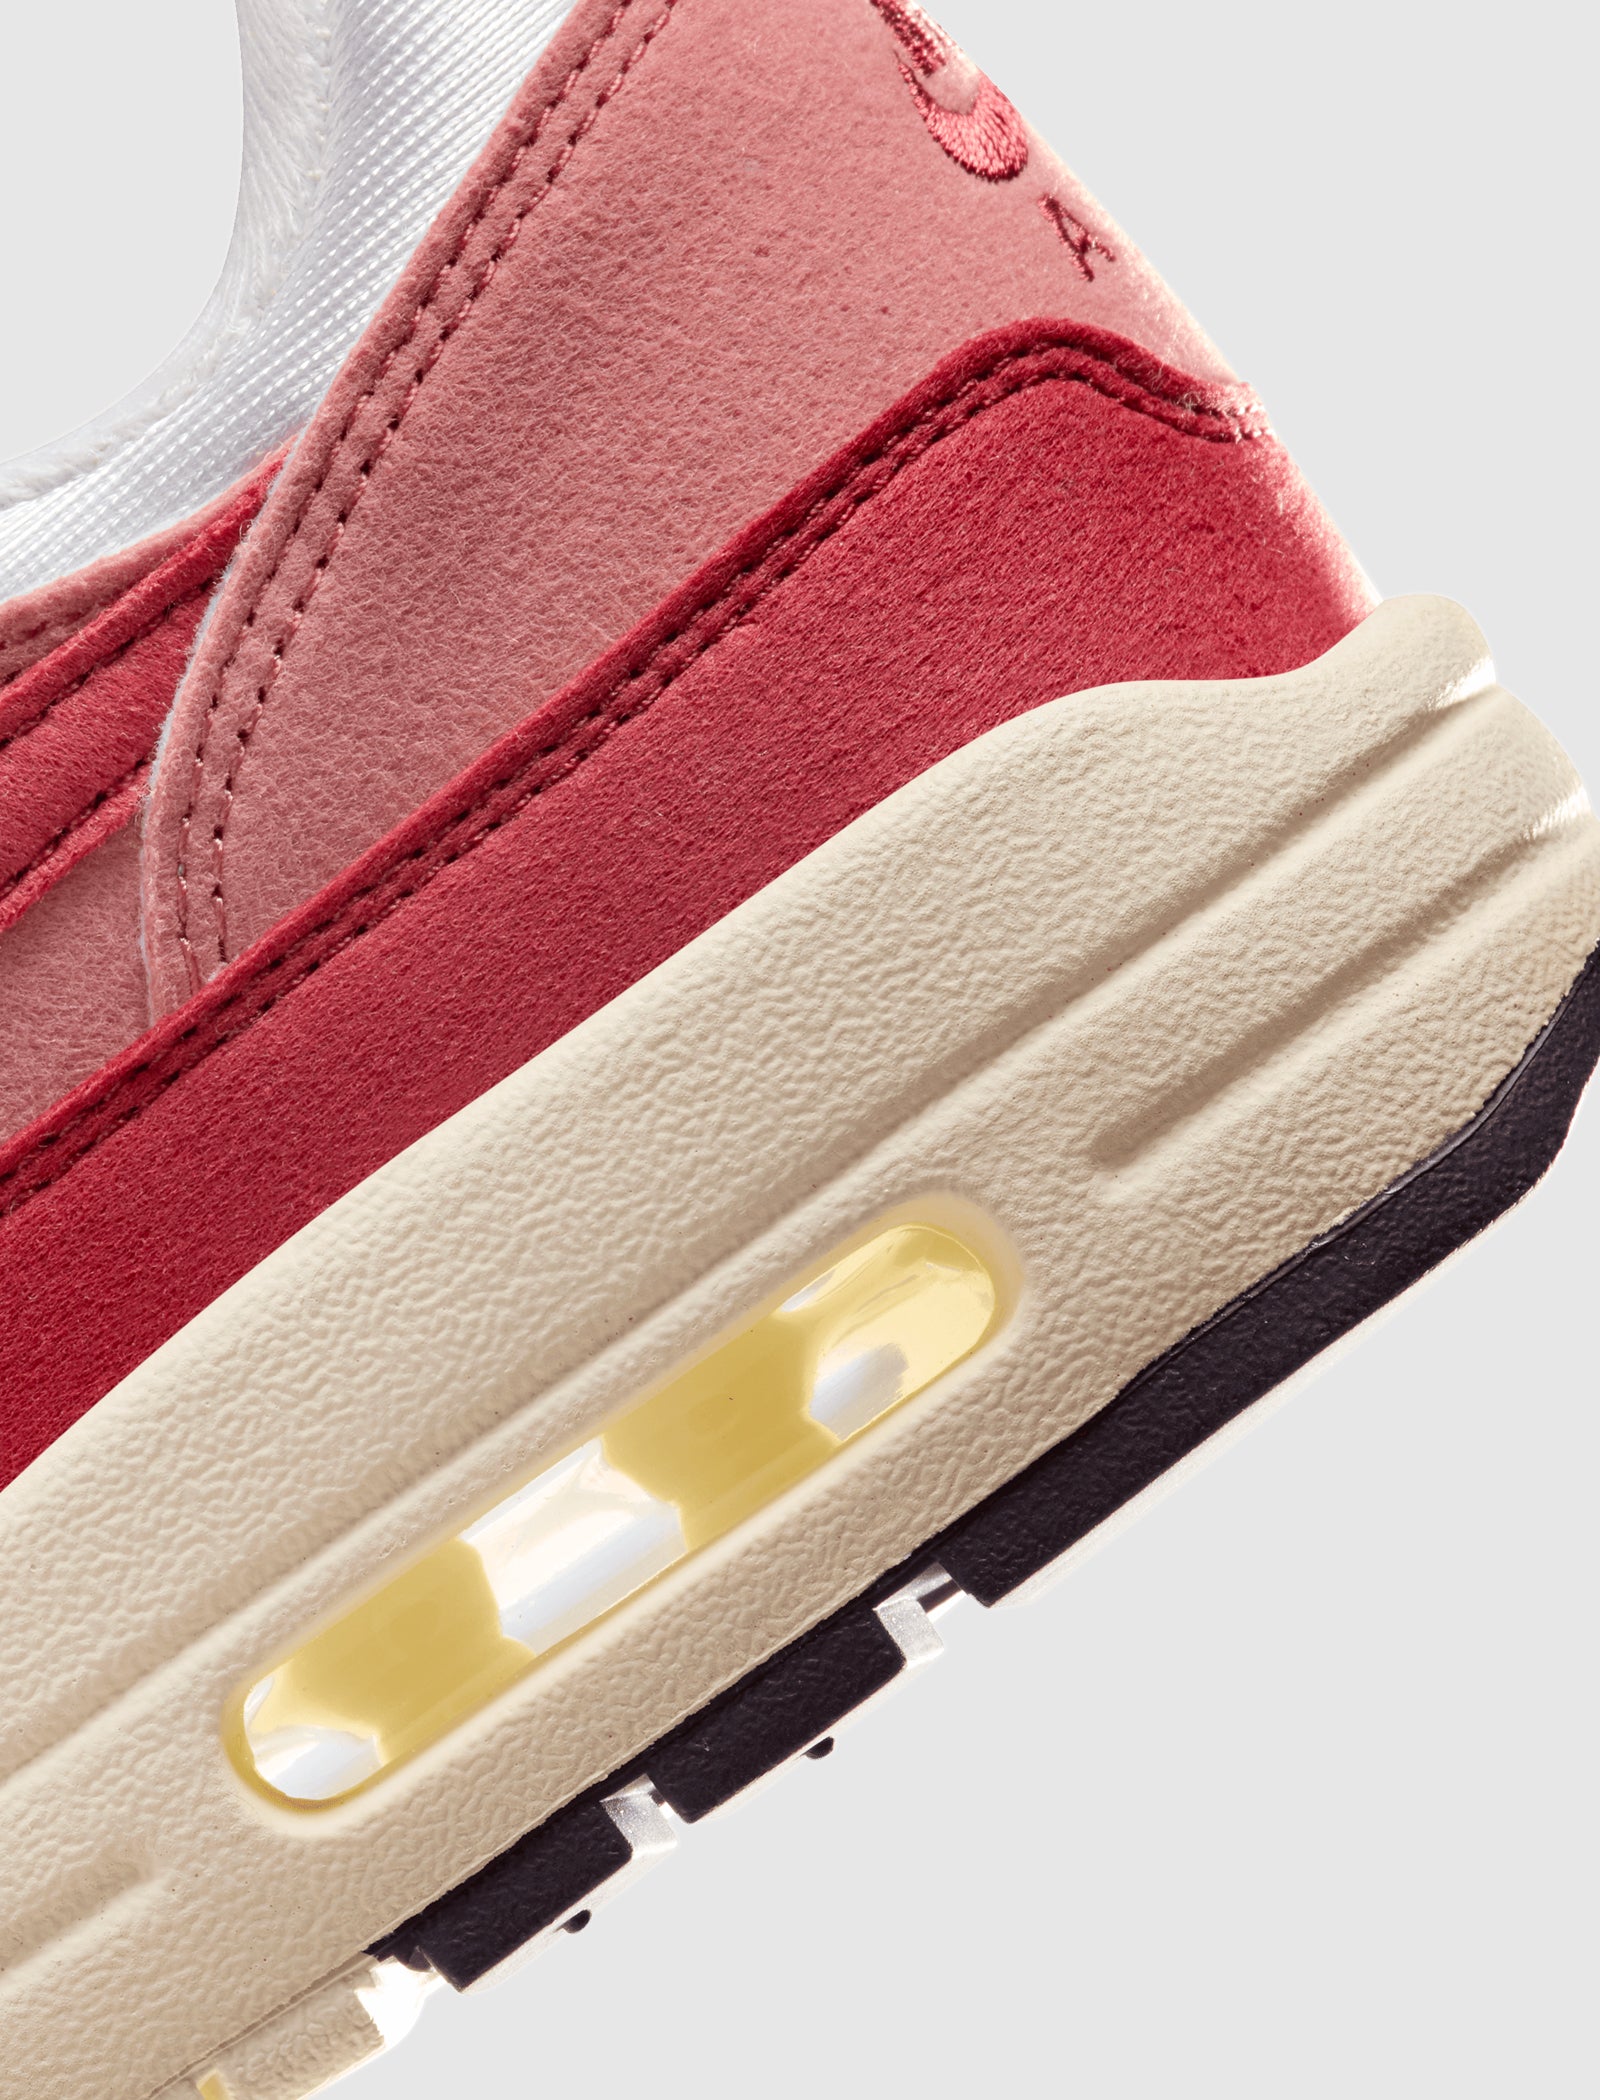 WOMEN'S AIR MAX 1 "RED STARDUST"